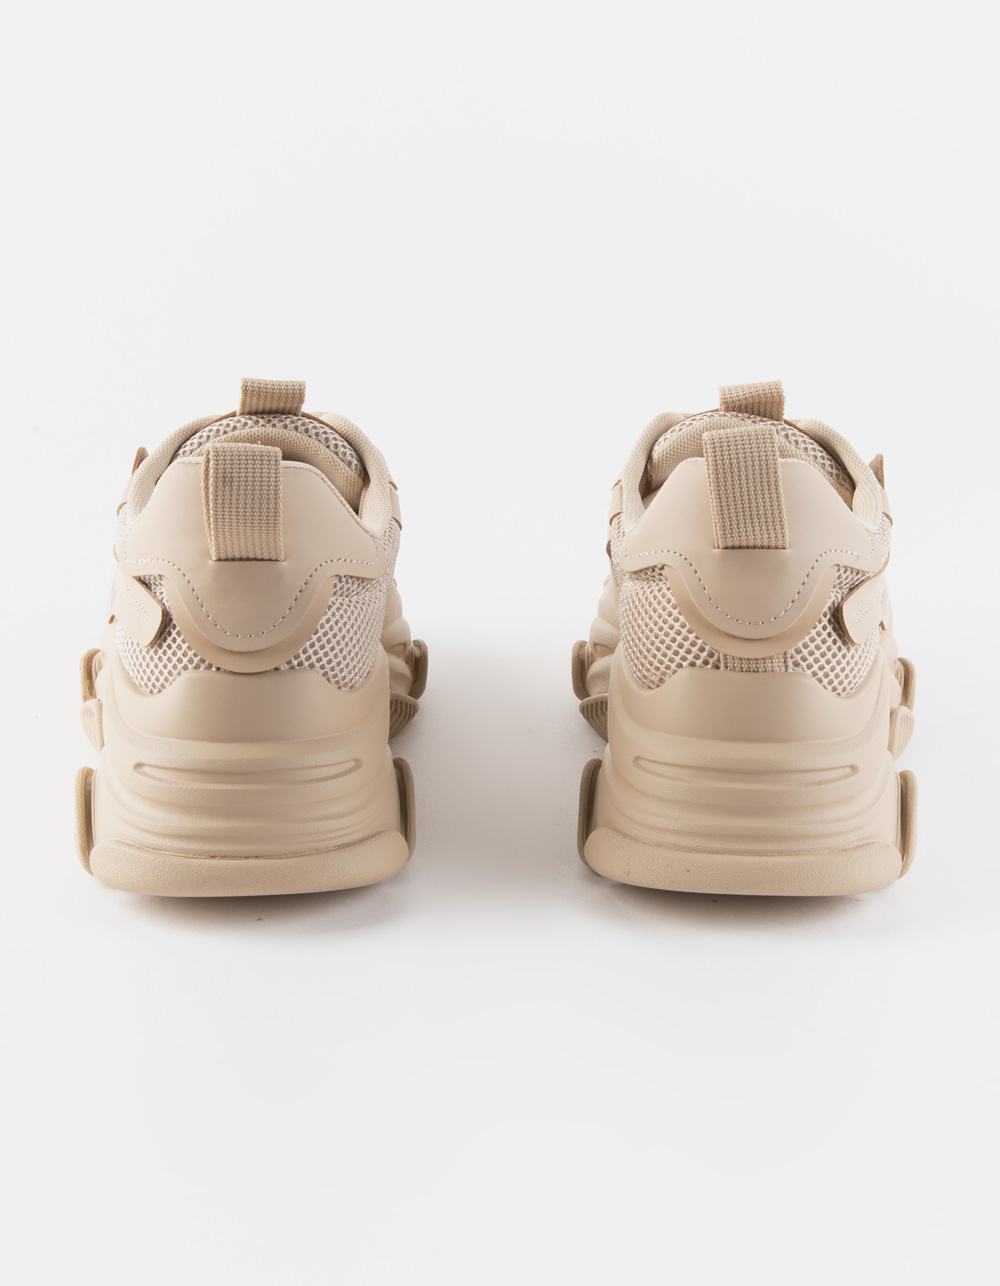 The Possession Sneaker In Tan – Krush Clothing Boutique